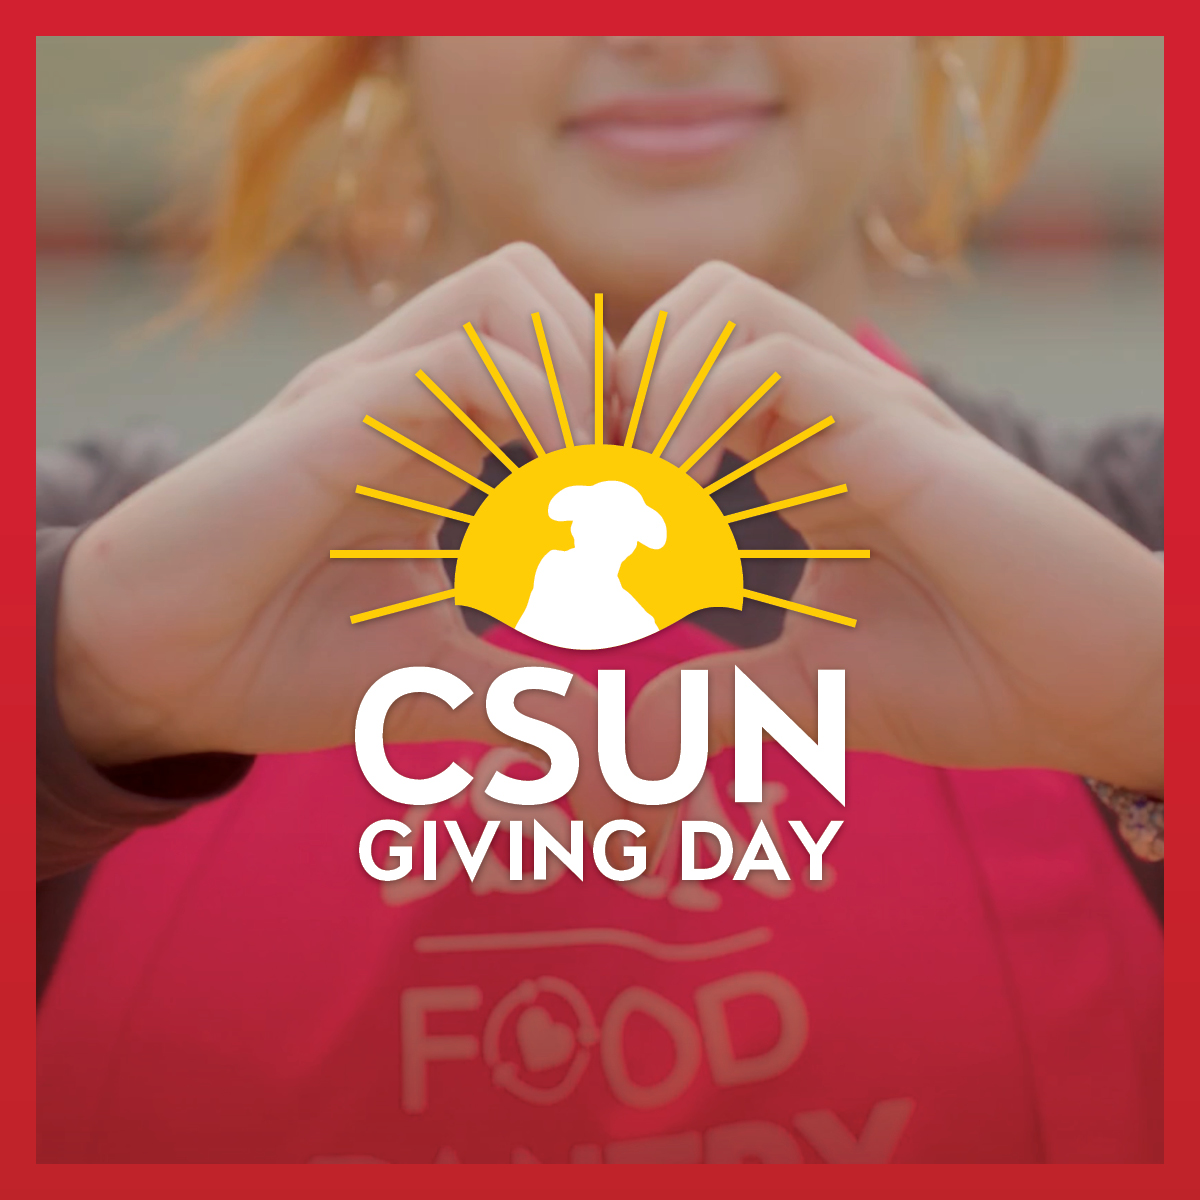 Our record-breaking #CSUNGivingDay ends at 8 p.m. today! Give now to ensure your gift is included in our final tally! Tap the link below to give to the program that means the most to you, then share your love for CSUN with the world. #BrighterTomorrow brnw.ch/21wHFmZ